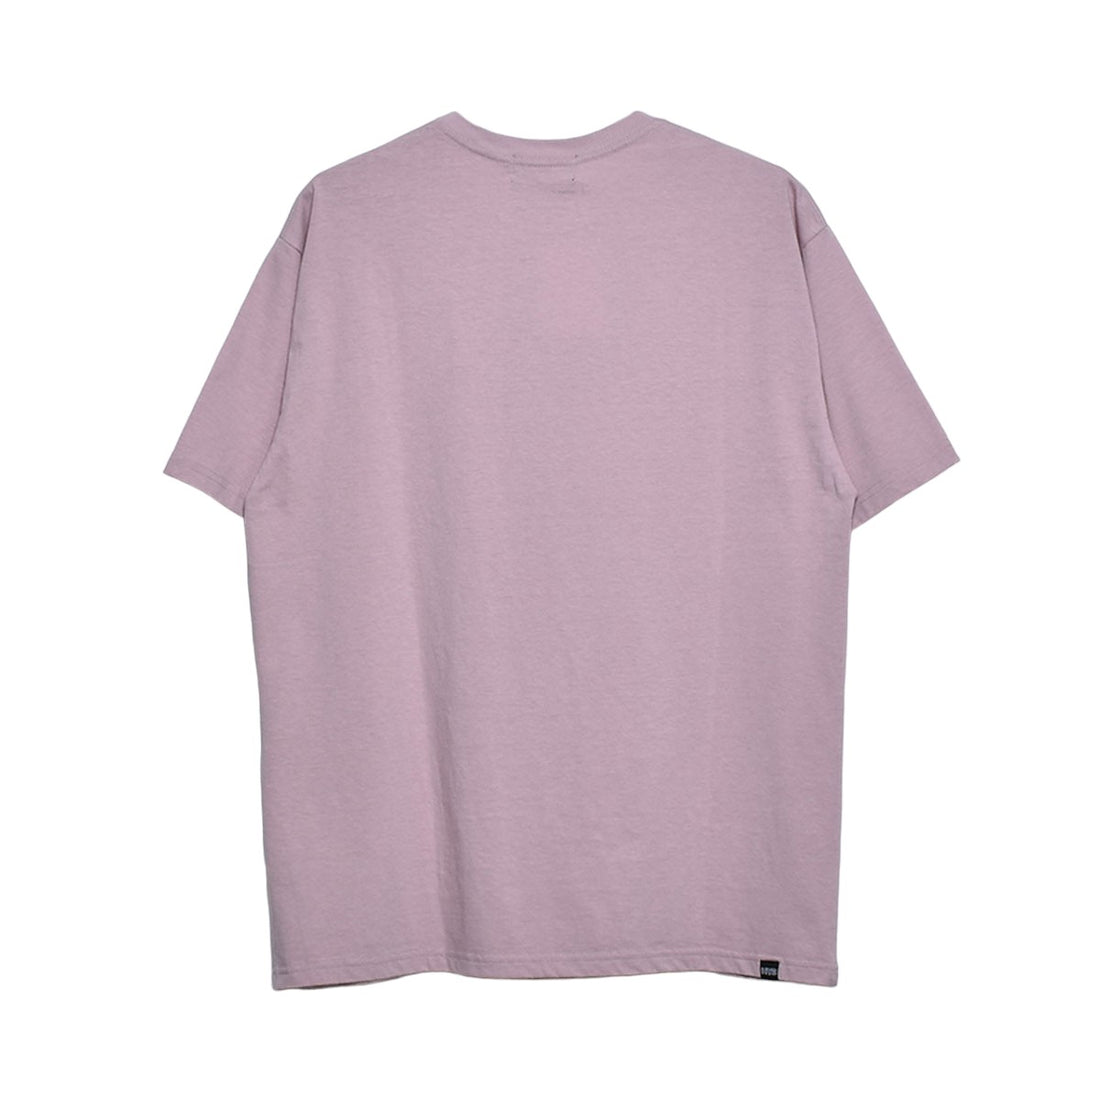 [HYSTERIC GLAMOUR]DENNIS MORRIS/SID VICIOUS Tシャツ/PINK(02241CT25)